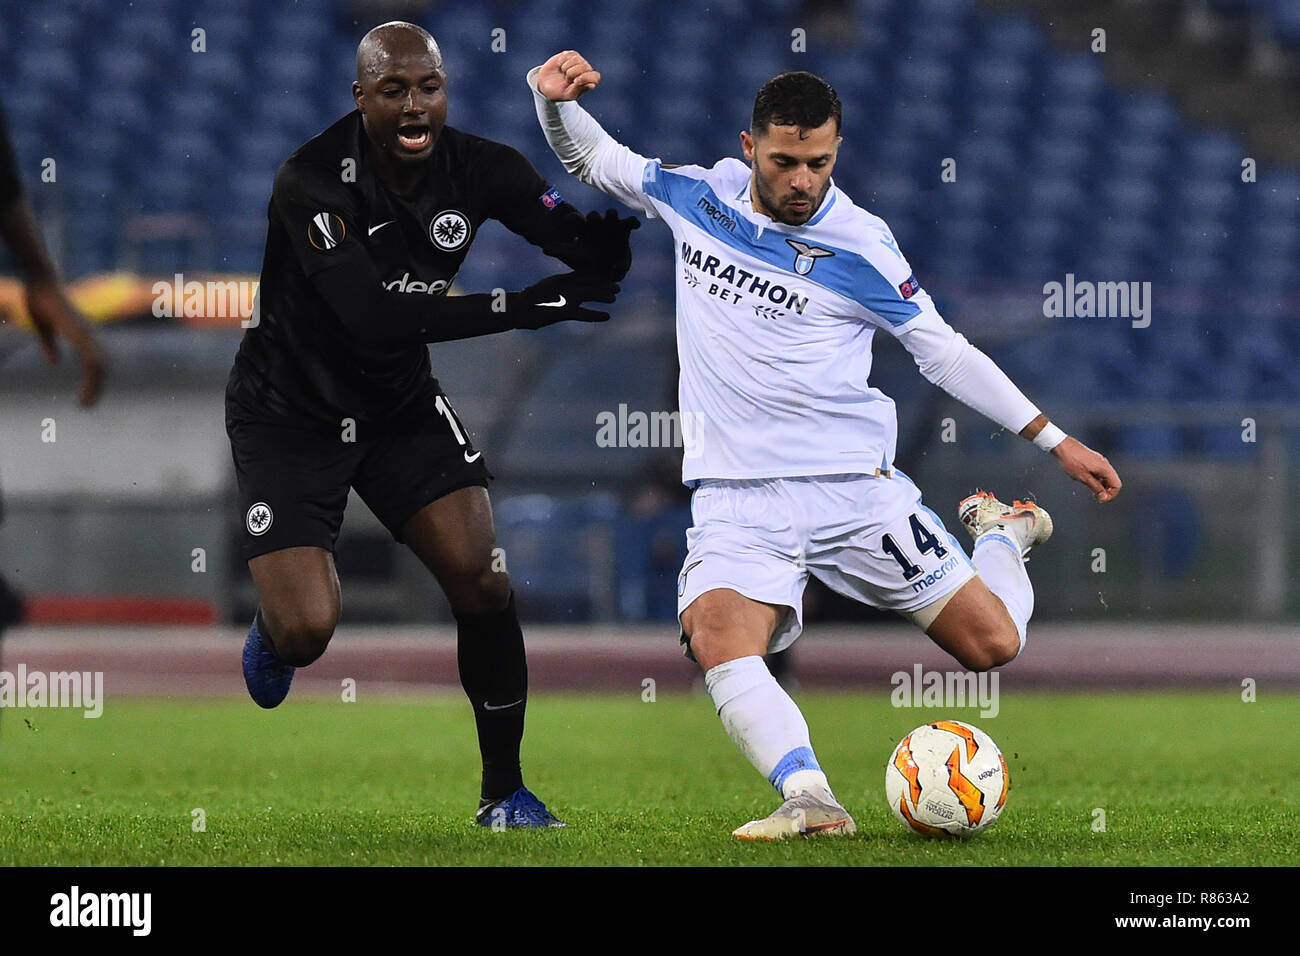 Rome, Italy. 14th Dec, 2018. Europa League match 6 Lazio vs Eintracht Frankfurt-Rome-13-12-2018 In the picture Jetro Willems and Riza Durmisi Photo Photographer01 Credit: Independent Photo Agency/Alamy Live News Stock Photo